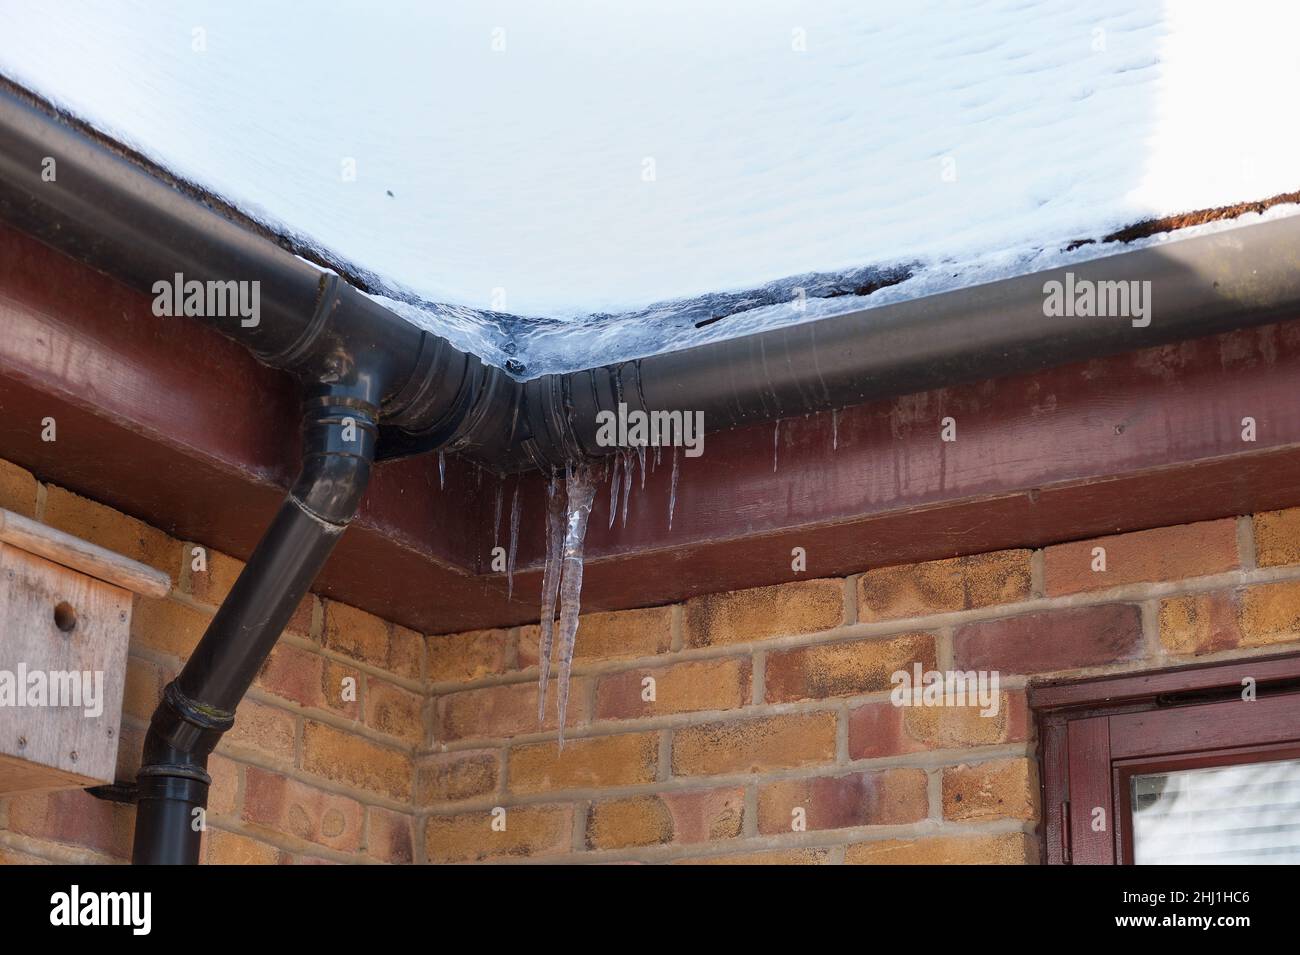 Valley of roof coated in snow & melting icy water produce blocked gutters and frozen downpipes with icicles forming on gutter dripping ice cold water Stock Photo